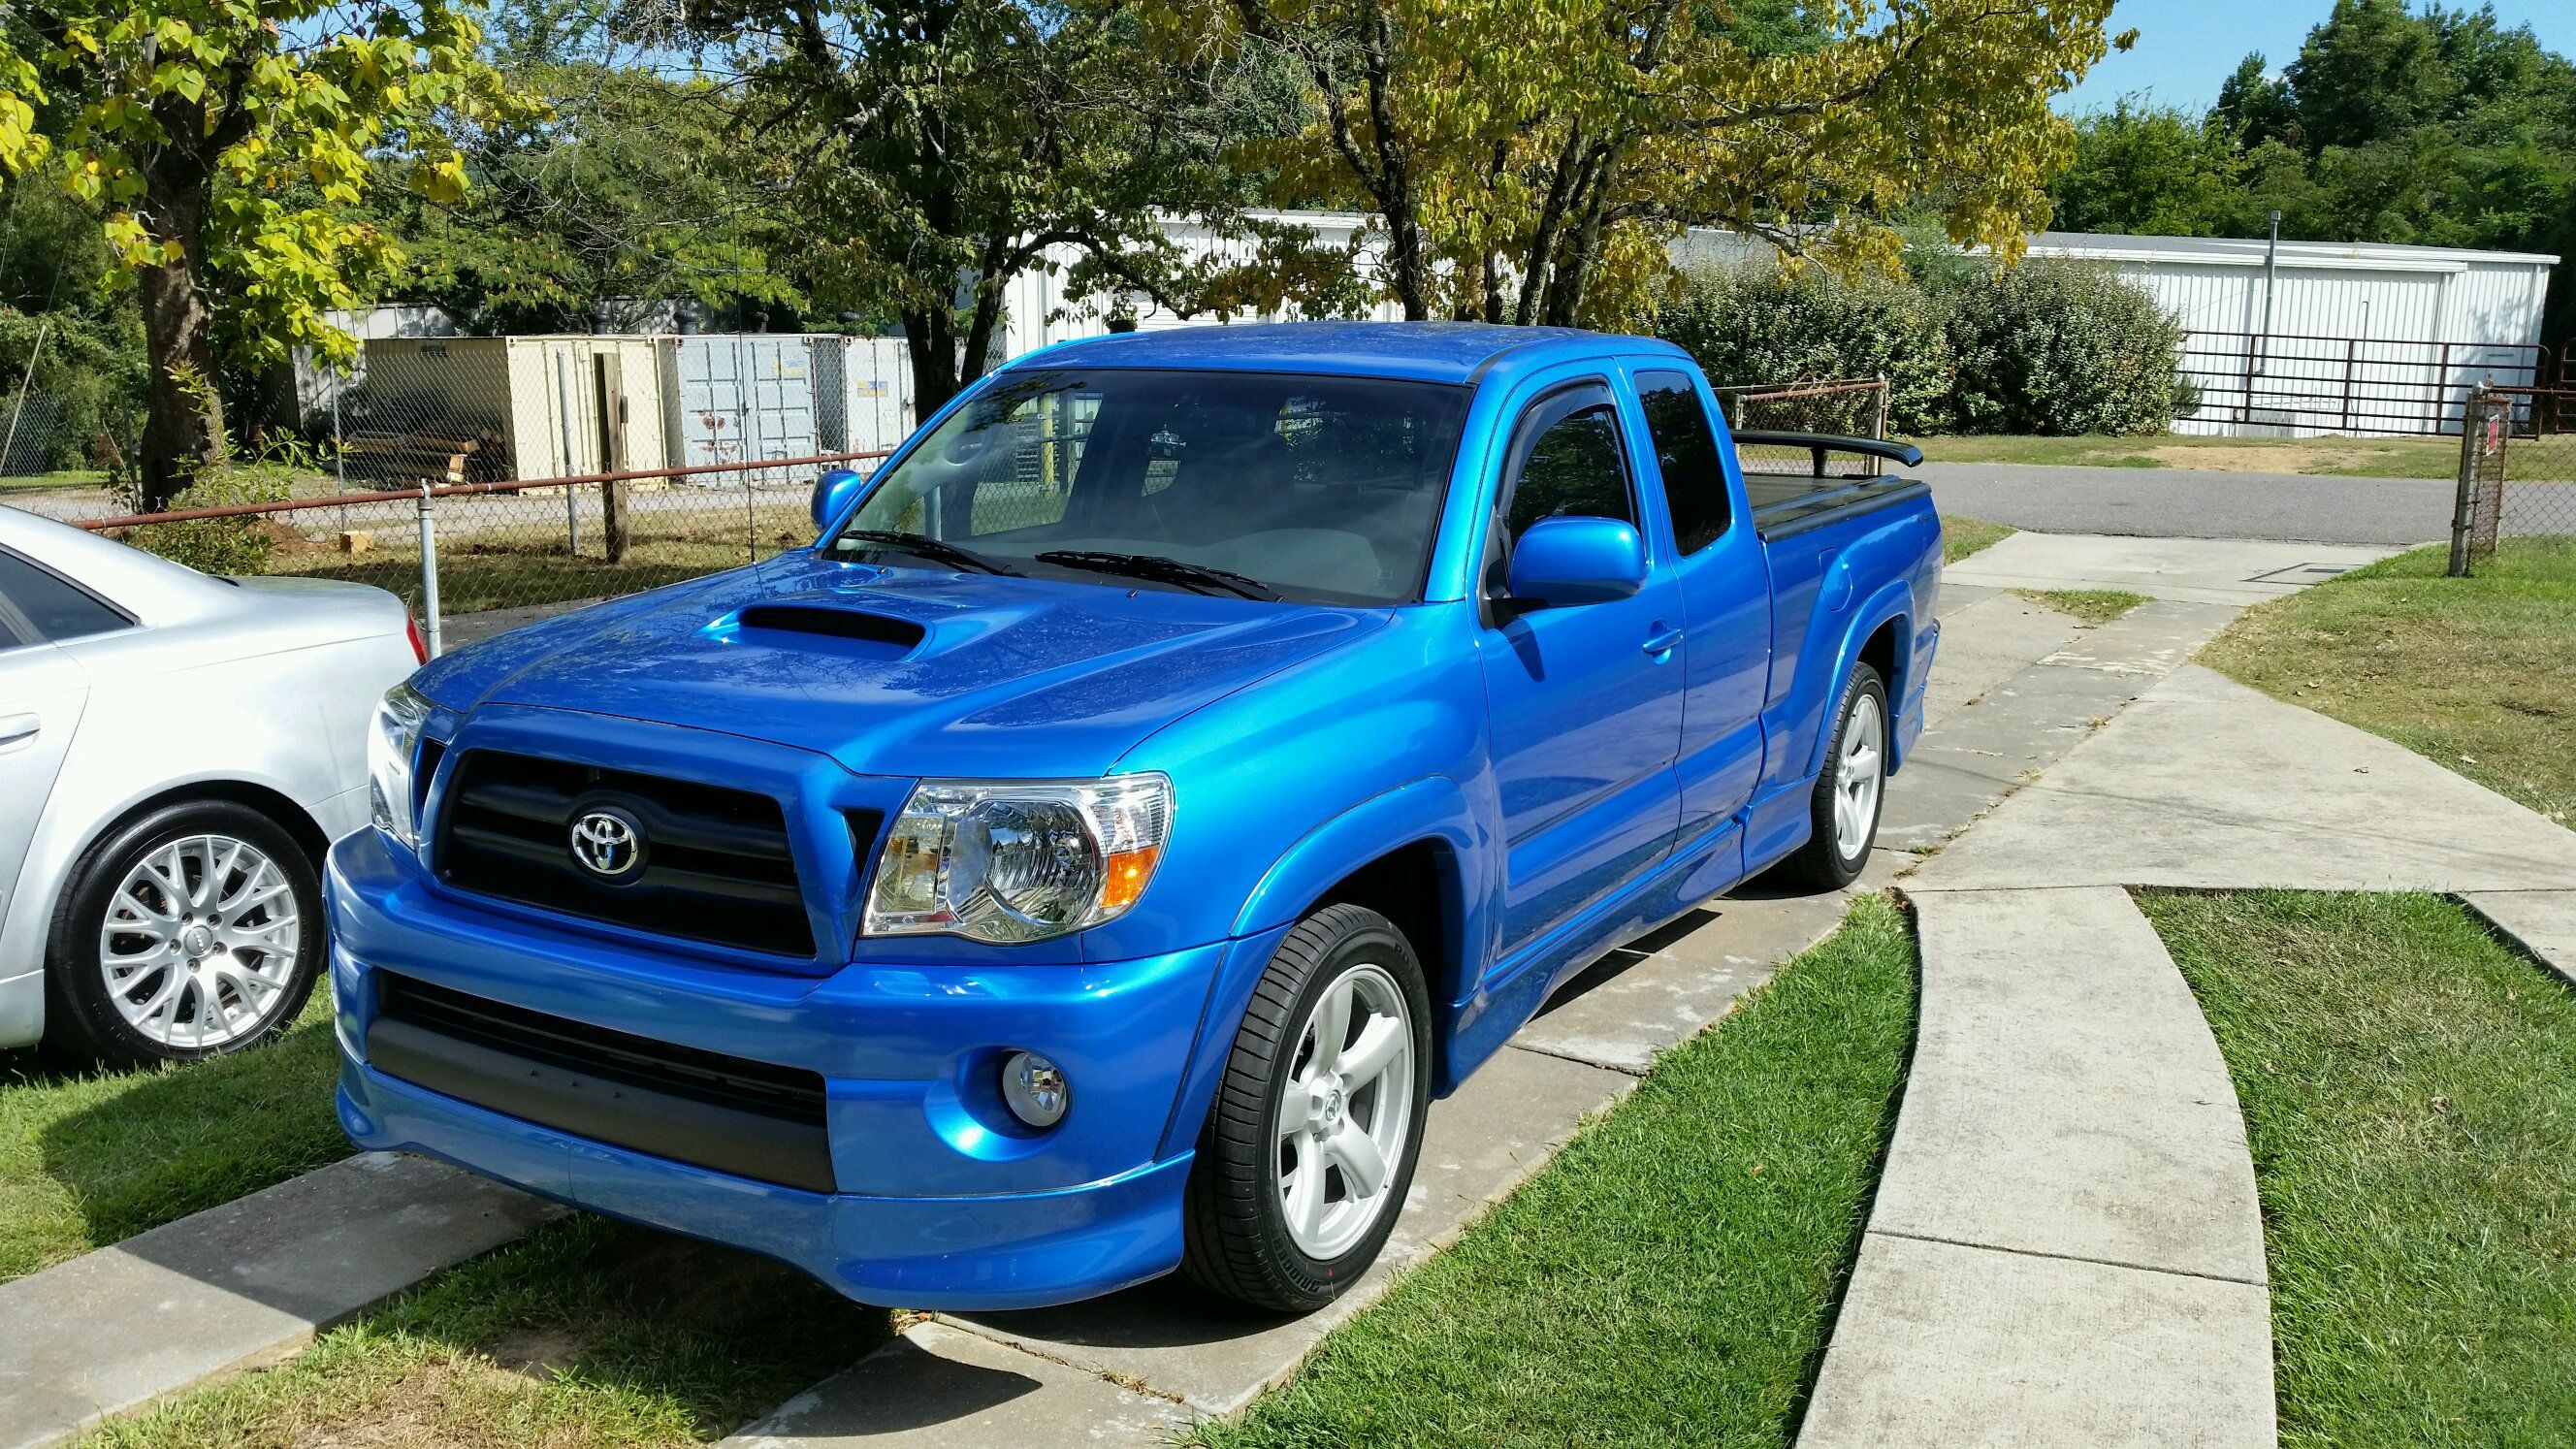 My new truck. A 2007 Toyota Tacoma X-runner supercharged with only 6,000 miles